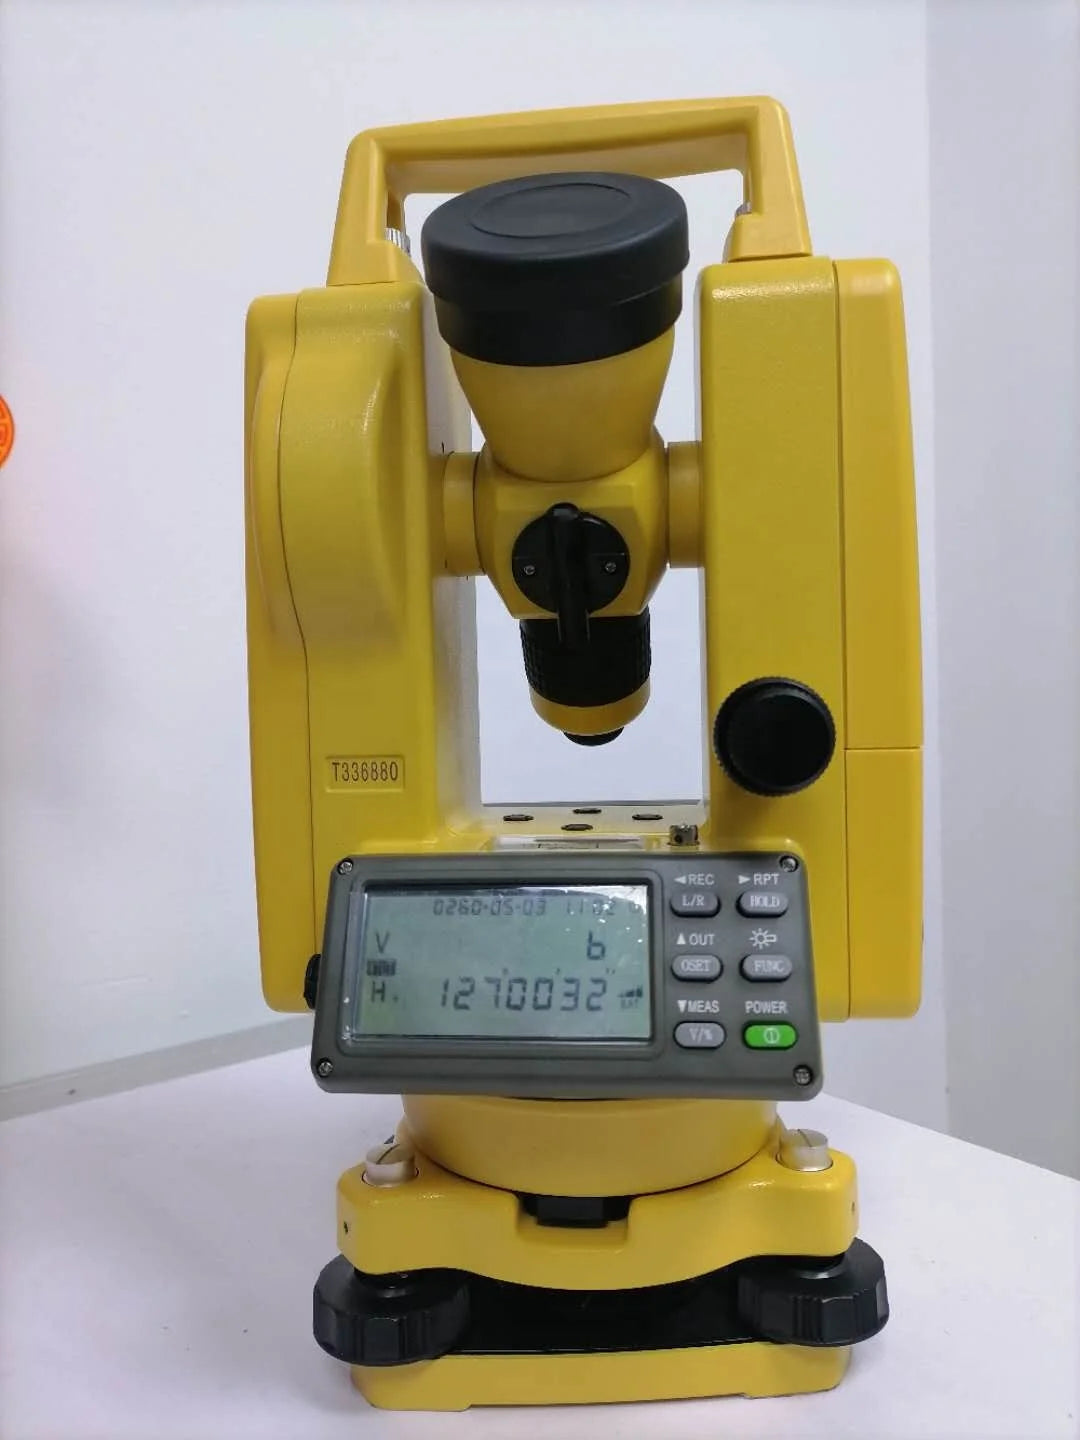 New 2023 In Stock Digital theodolite SOUTH ET02 Electronic theodolites total station Surveying Instrument